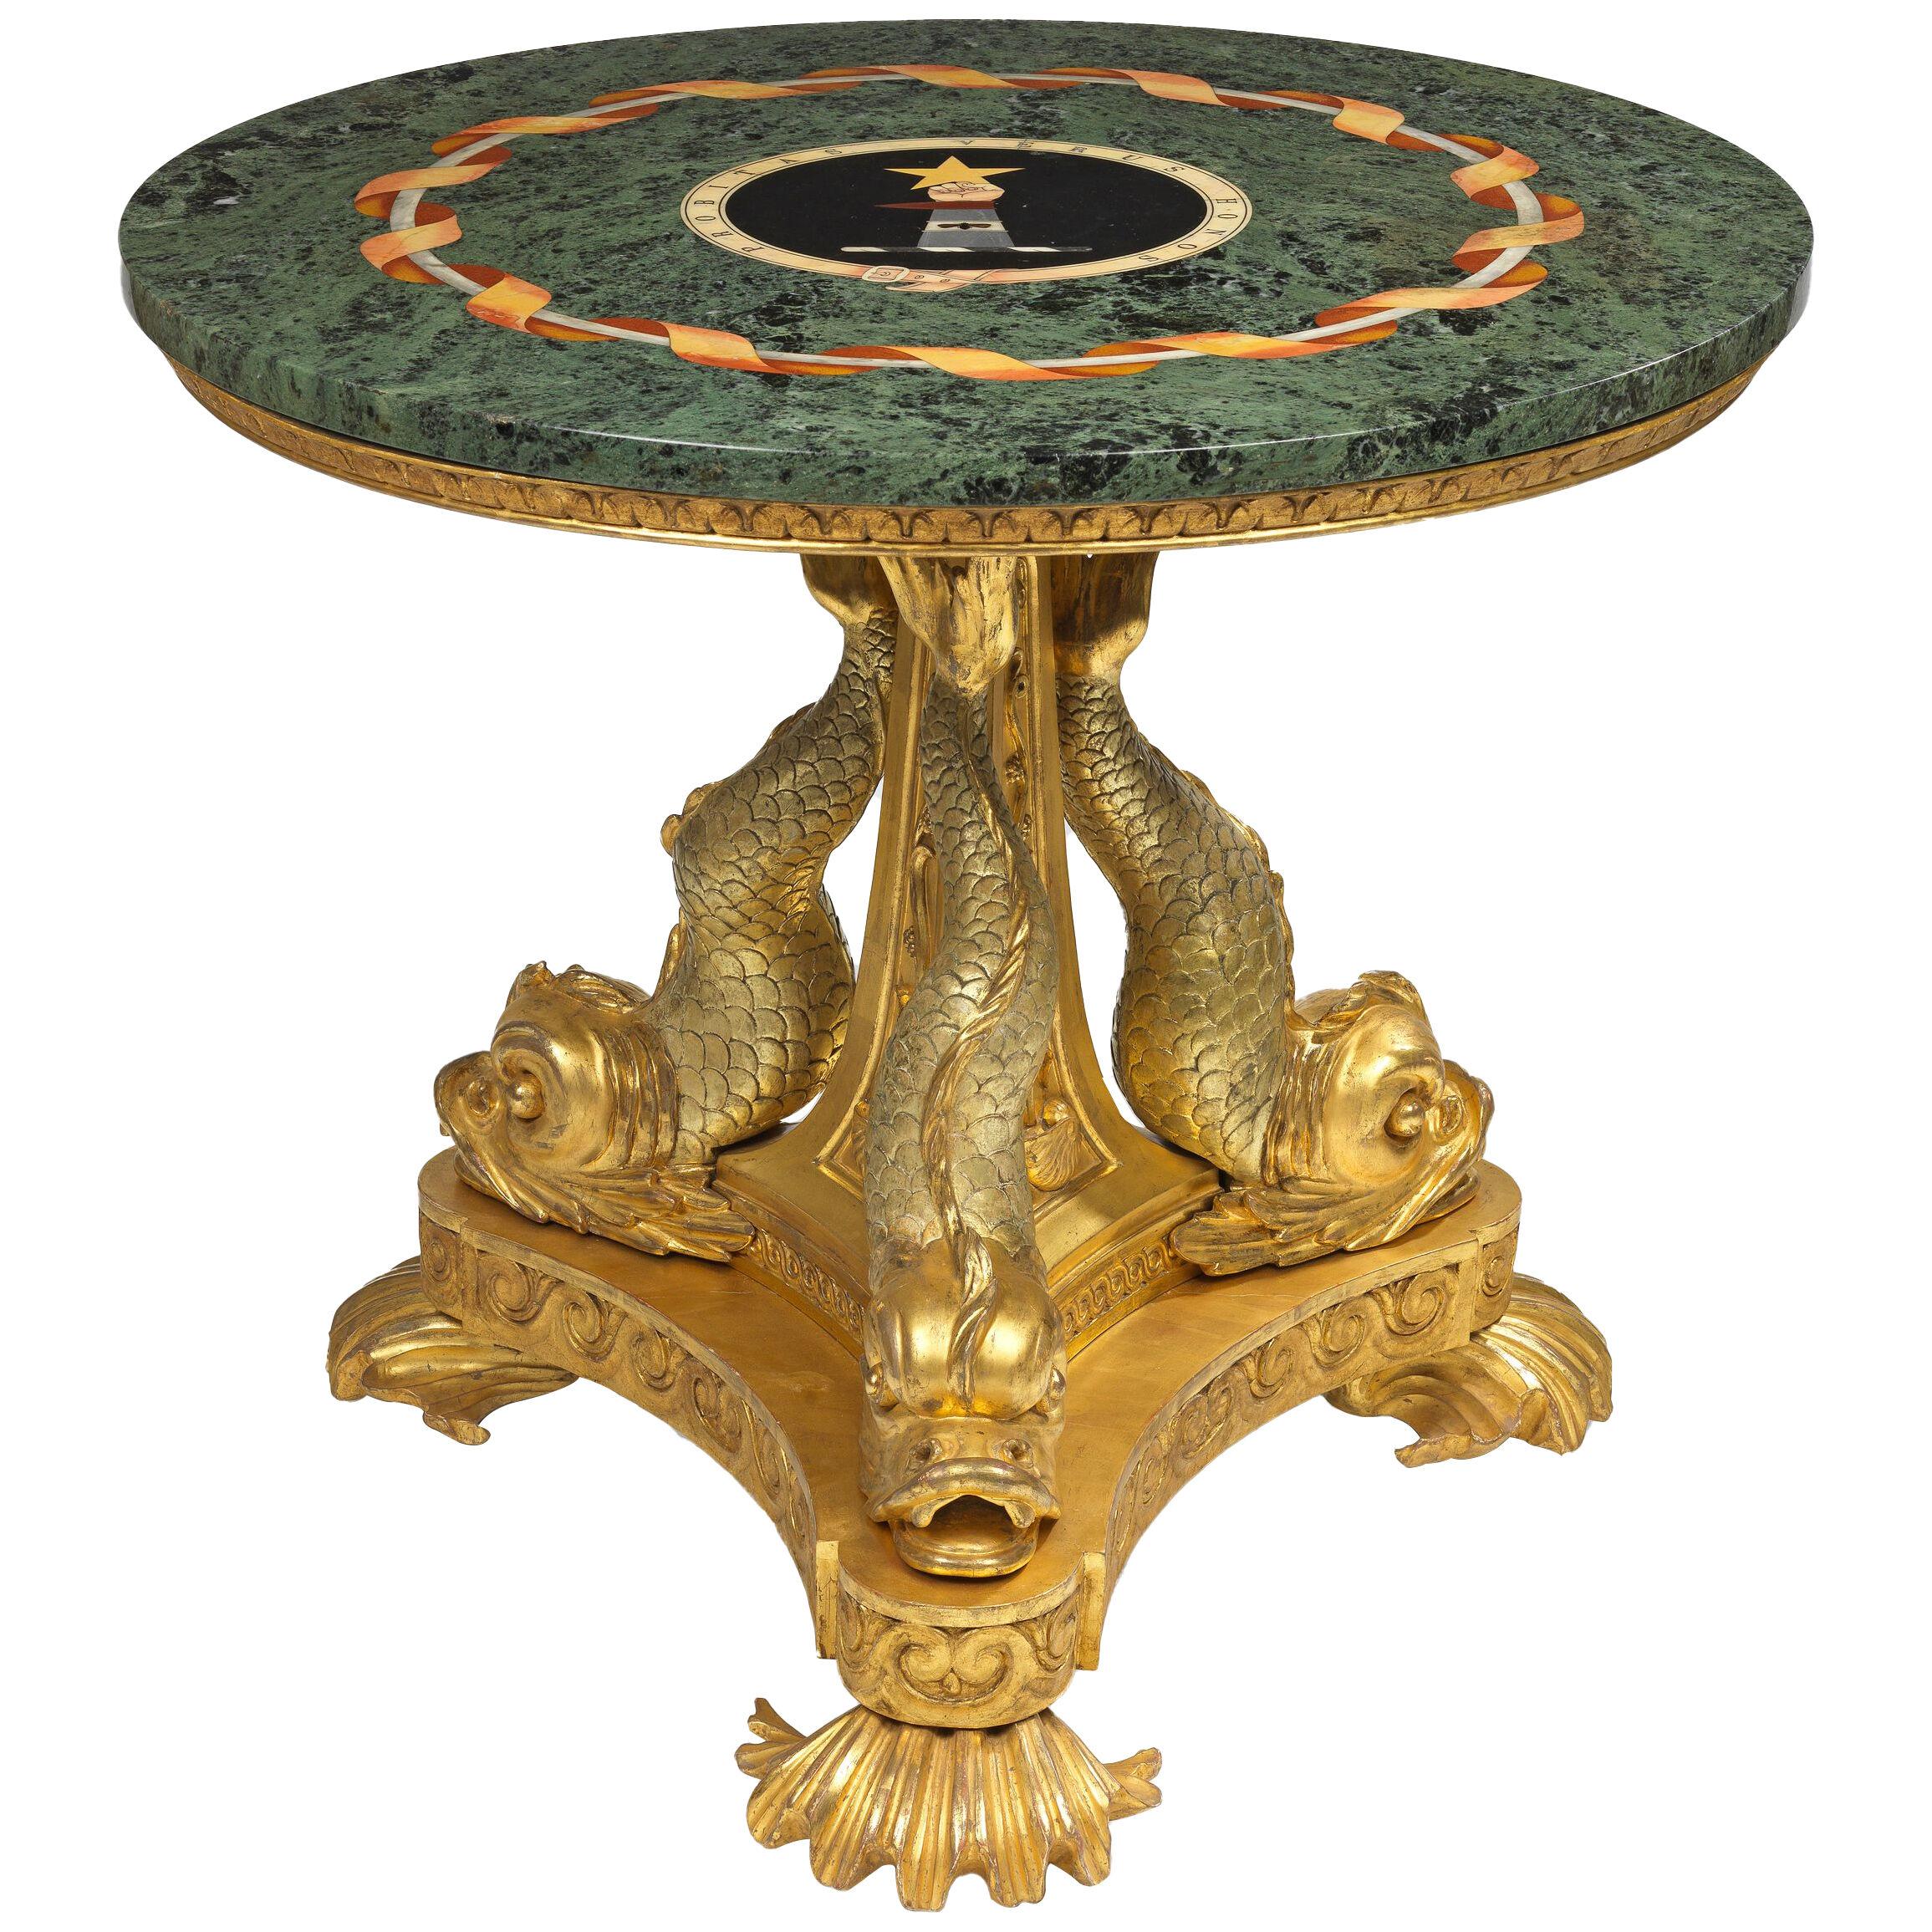 A Regency Giltwood and Pietre Dure Centre Table Inlaid with the Hansard Crest